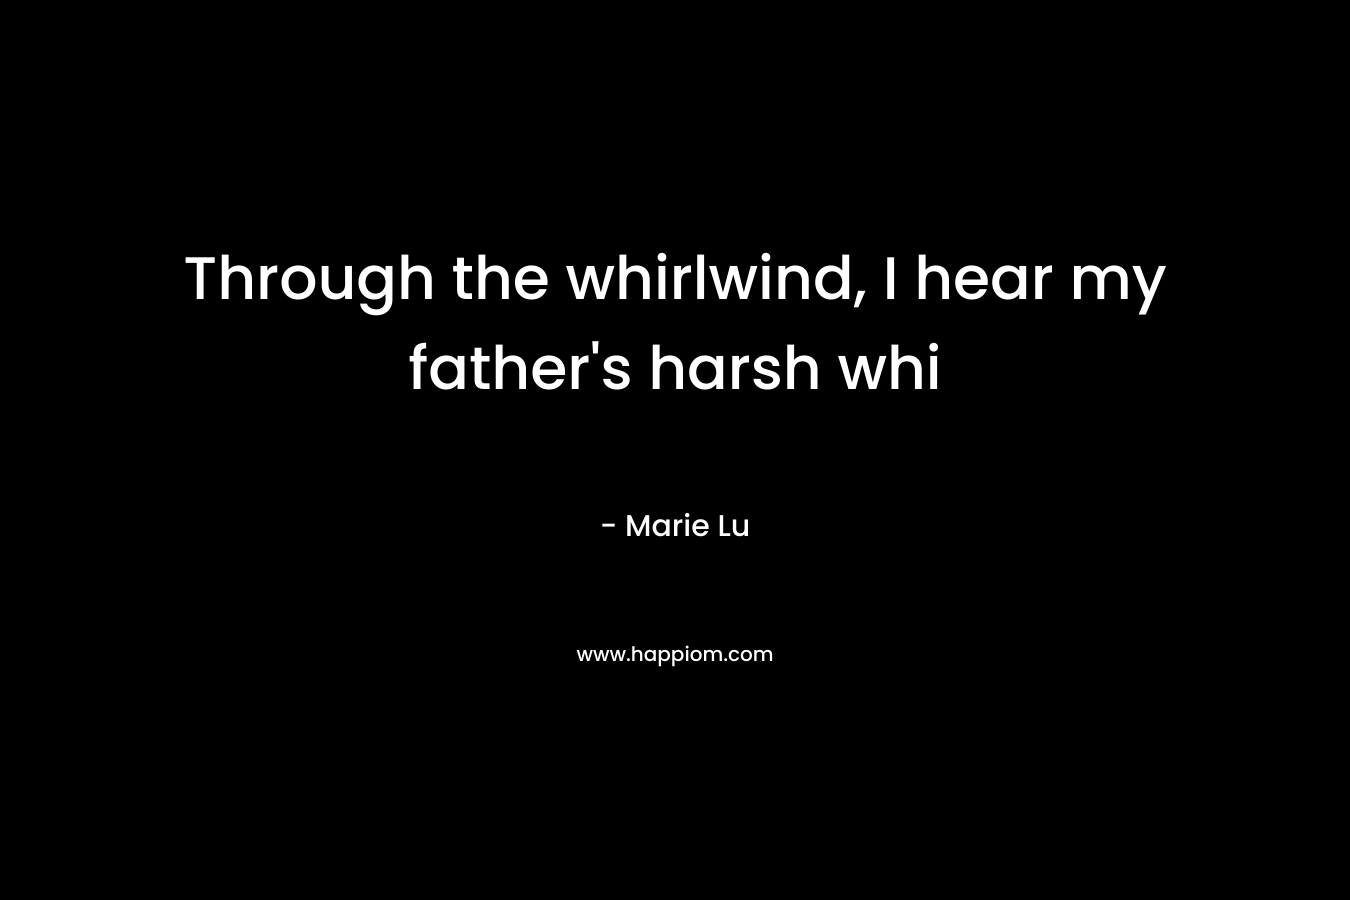 Through the whirlwind, I hear my father’s harsh whi – Marie Lu